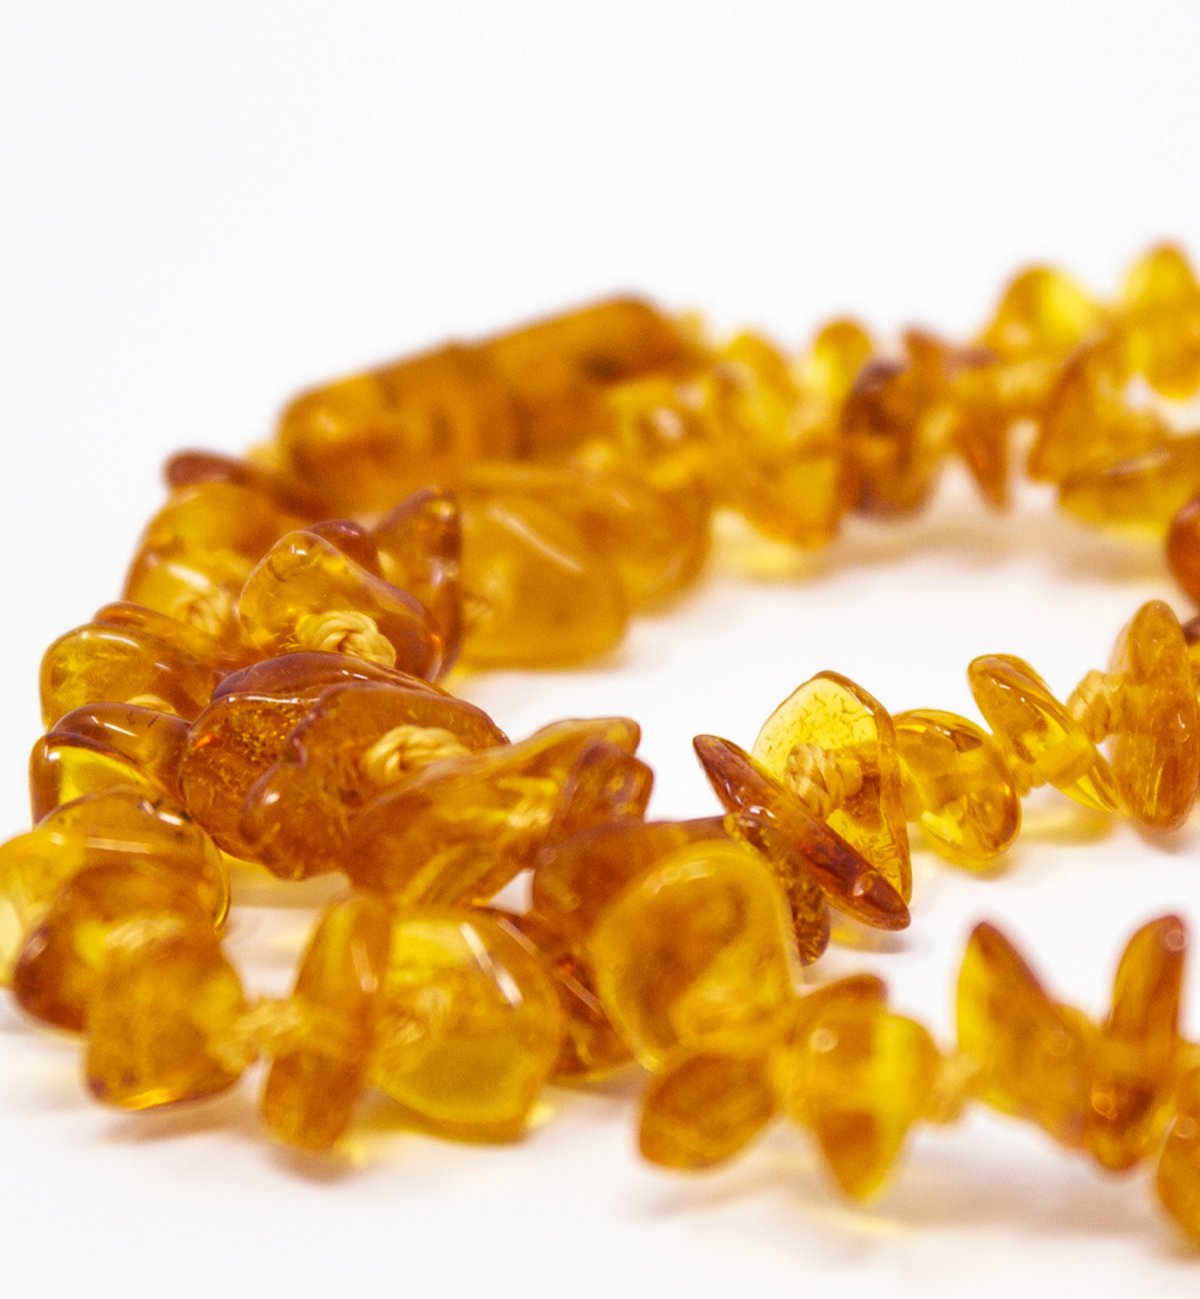 Honey-coloured amber baby necklace with Kadolis safety clasp